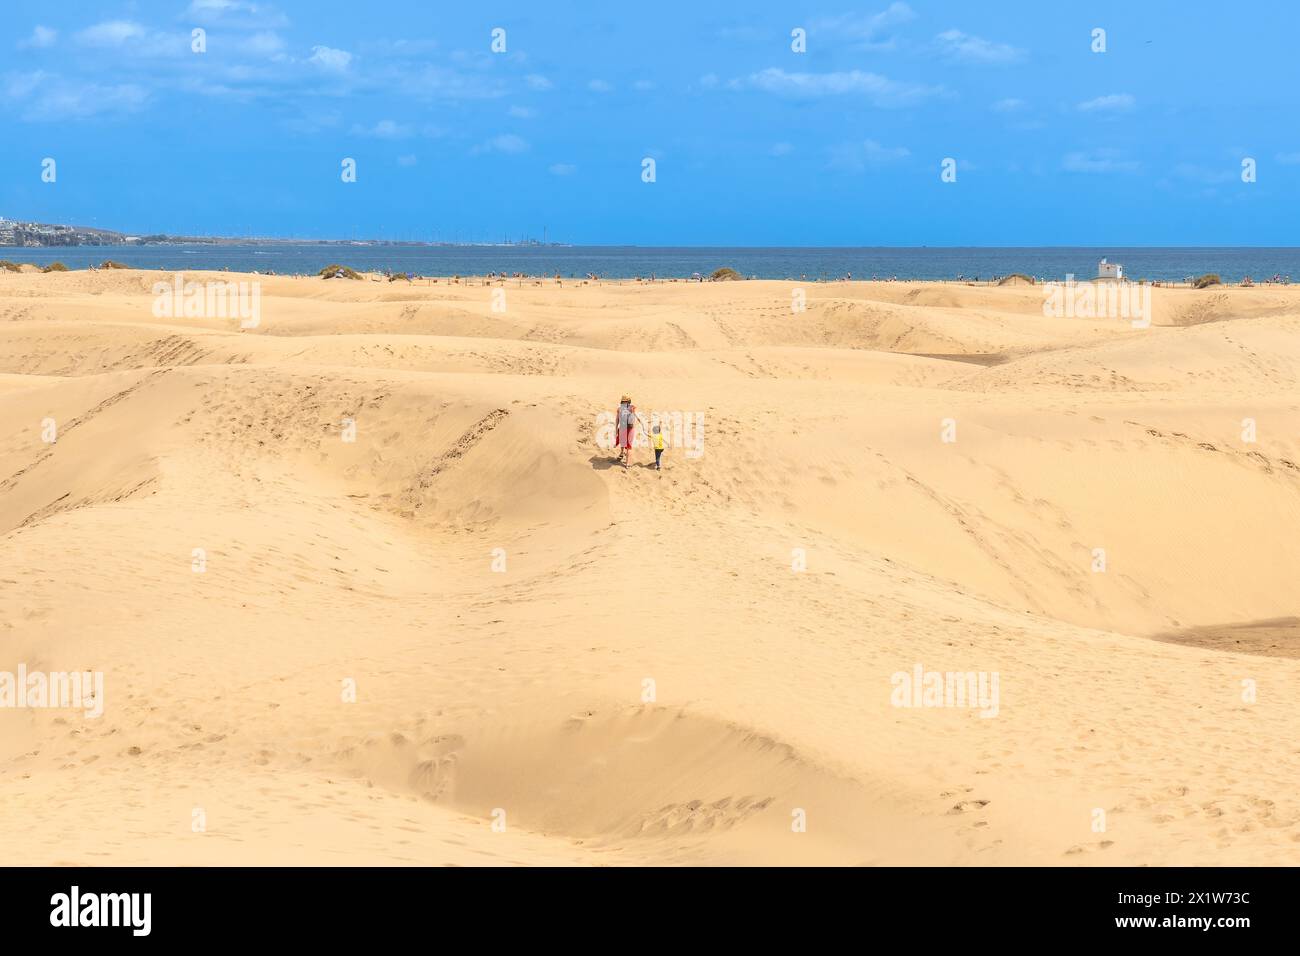 Mother and child walking on summer holidays in the dunes of Maspalomas, Gran Canaria, Canary Islands Stock Photo